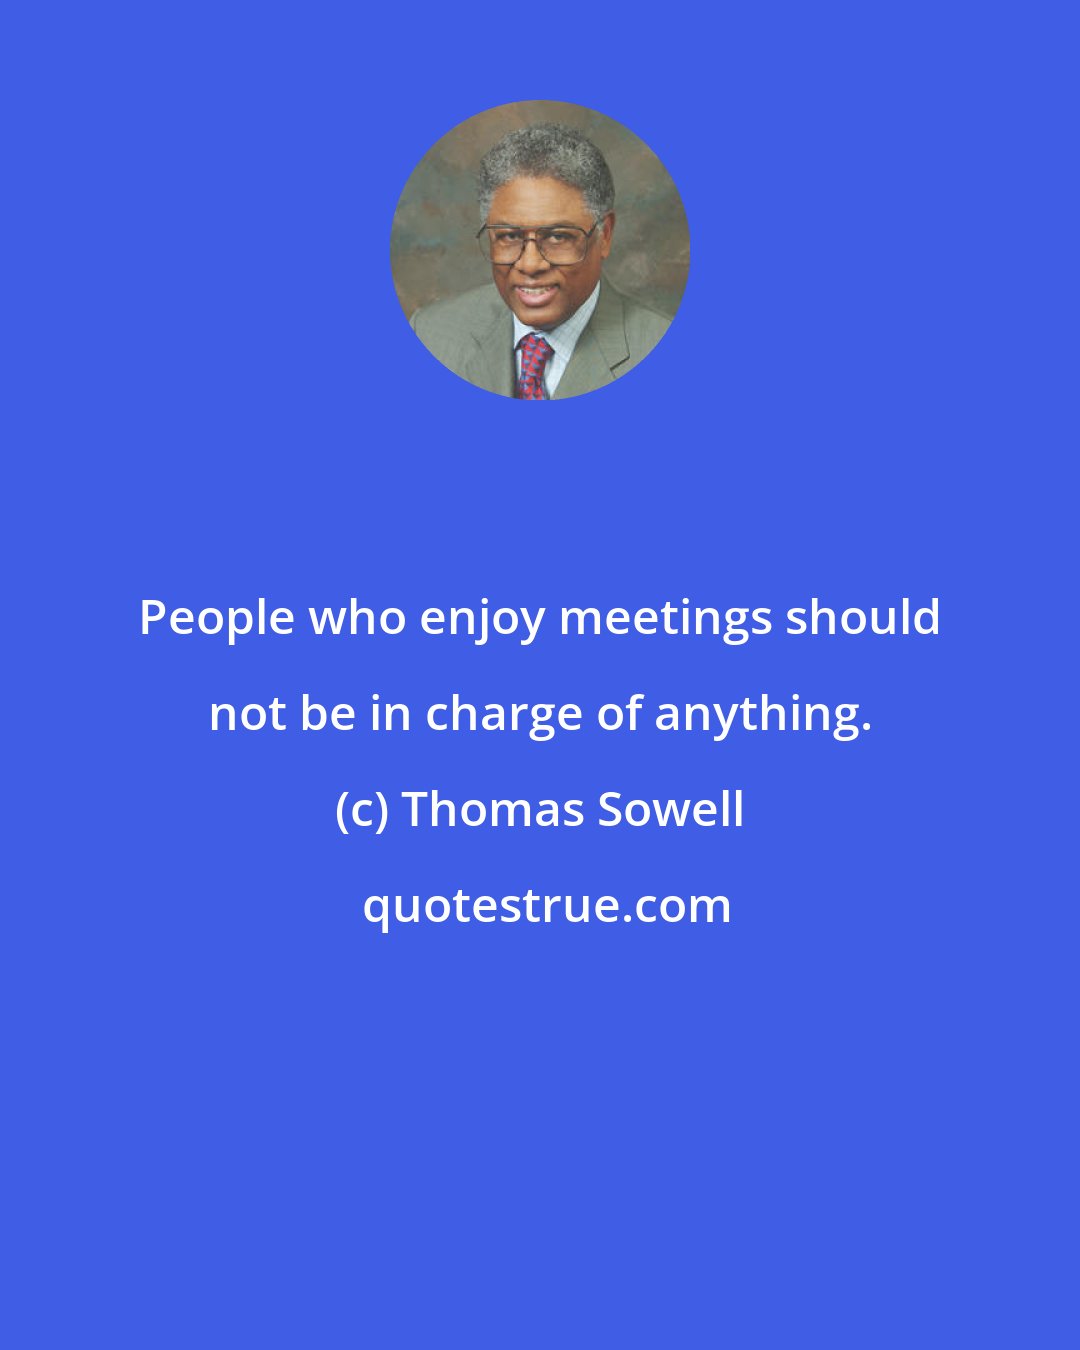 Thomas Sowell: People who enjoy meetings should not be in charge of anything.